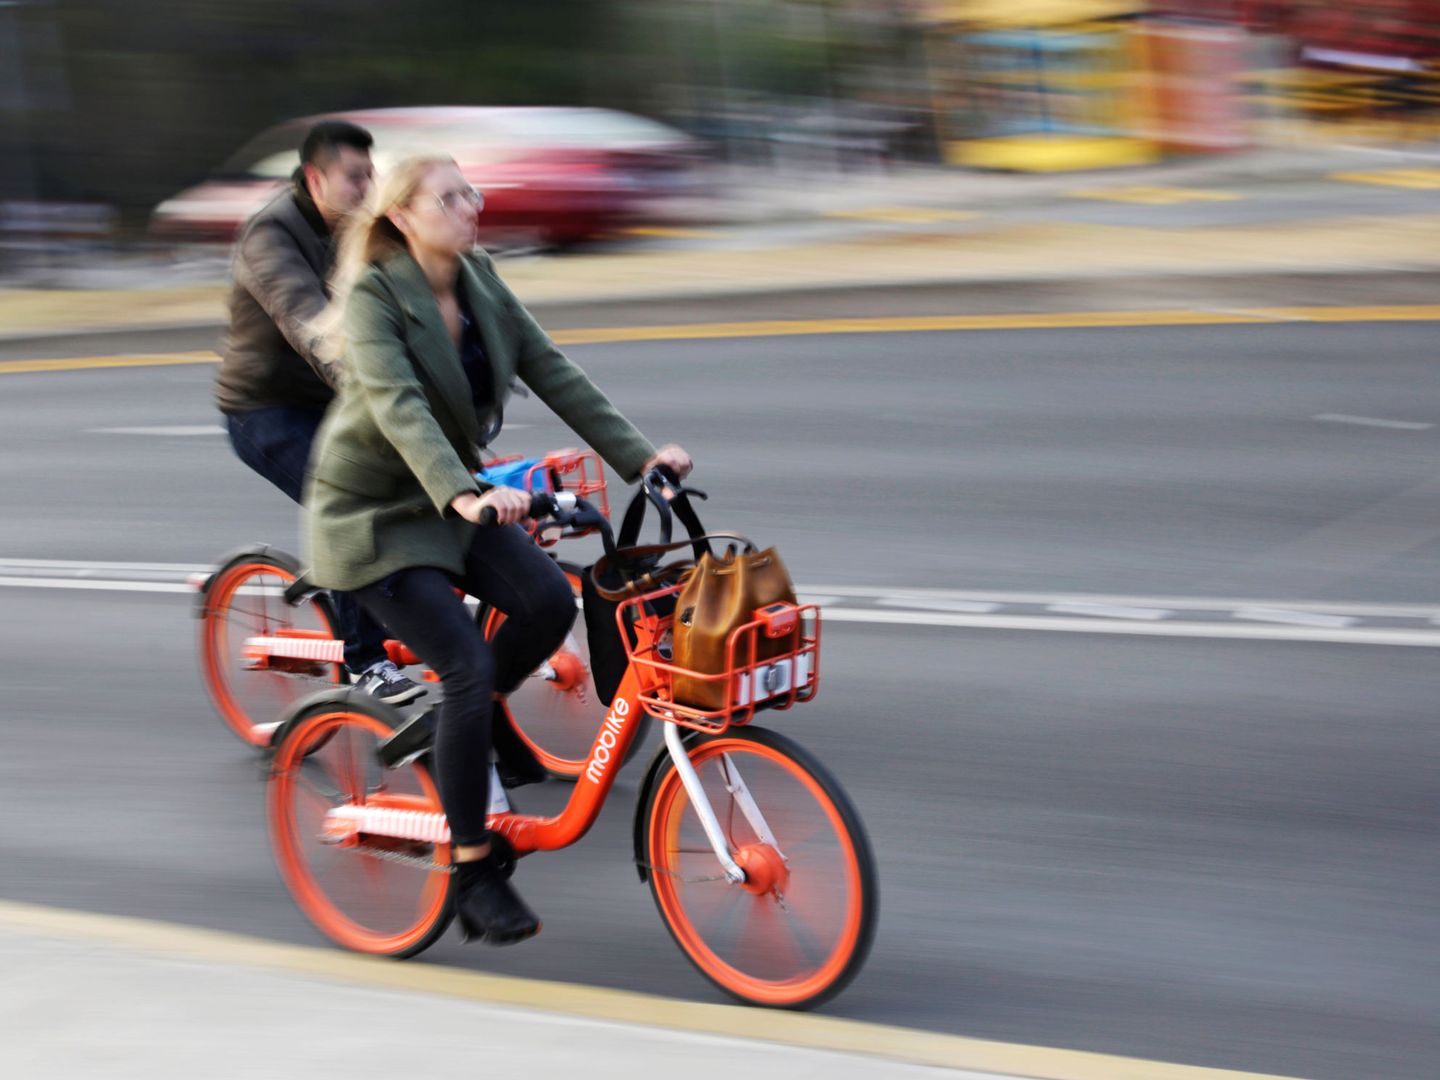 People ride bikes from Chinese bike-sharing company Mobike in Mexico City, Mexico January 10, 2019. REUTERS Daniel Becerril